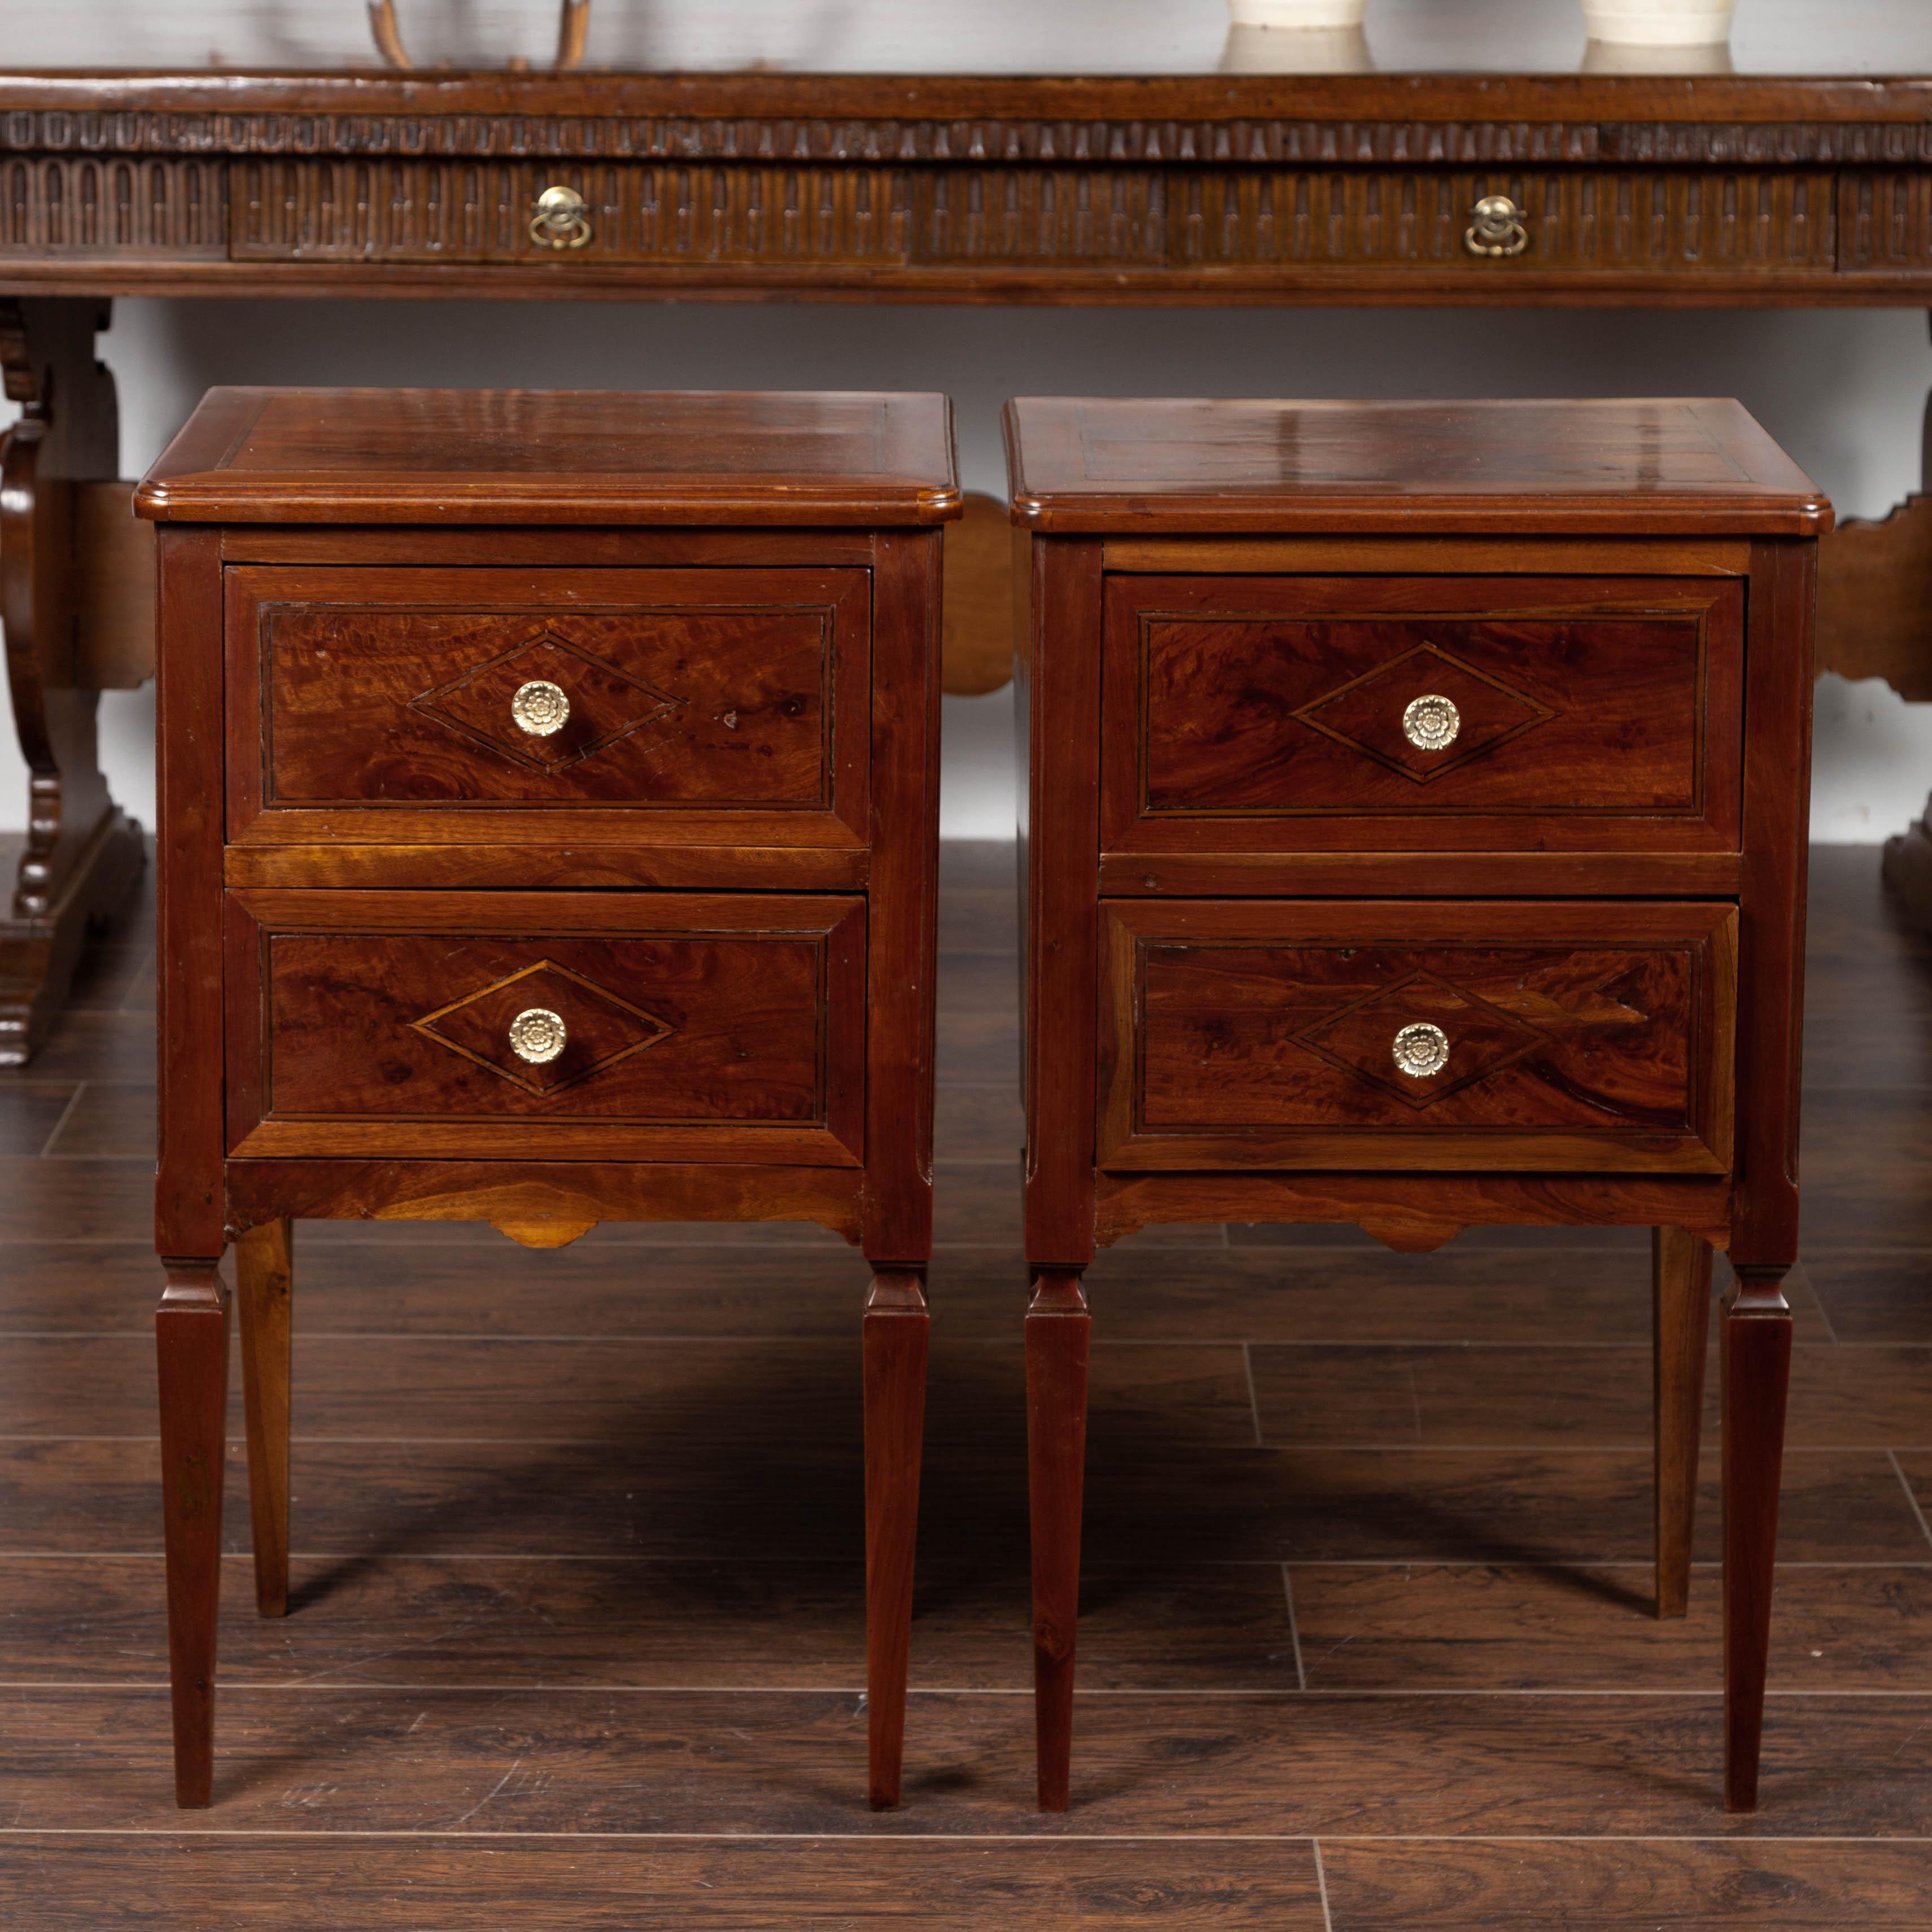 A pair of Italian neoclassical style walnut commodes from the mid-19th century, with tapered legs and inlaid diamond motifs. Born in Italy during the second quarter of the 19th century, each of this pair of walnut commodes features a rectangular top